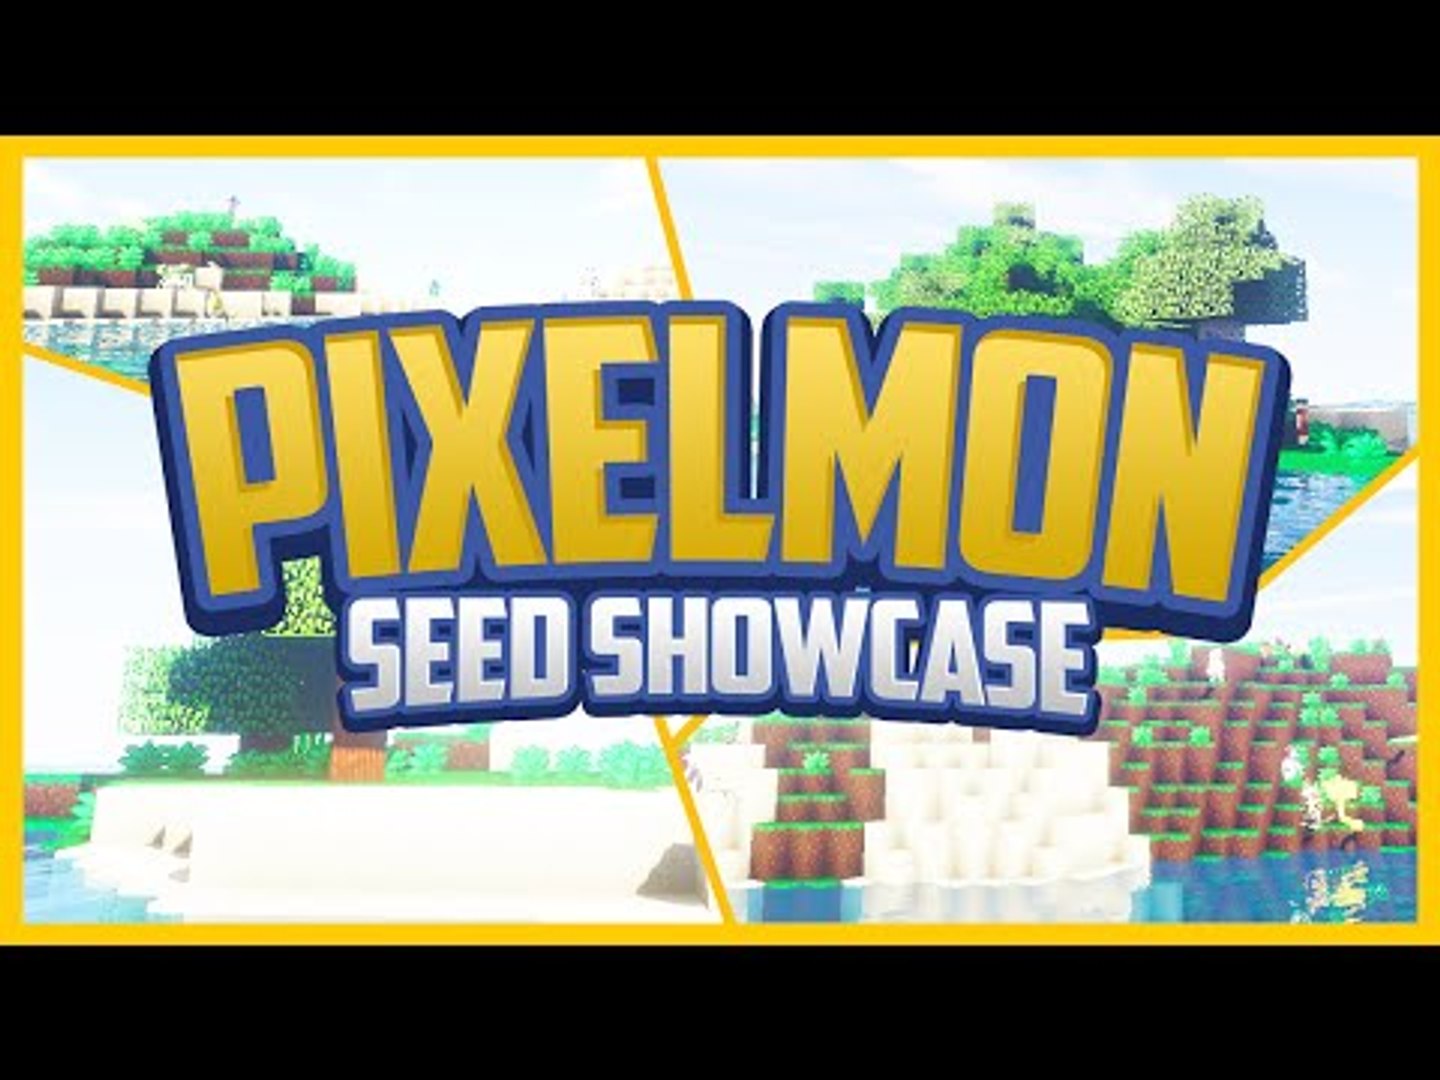 Minecraft Pixelmon Seed Showcase! "OODLES ISLANDS!!" - video Dailymotion